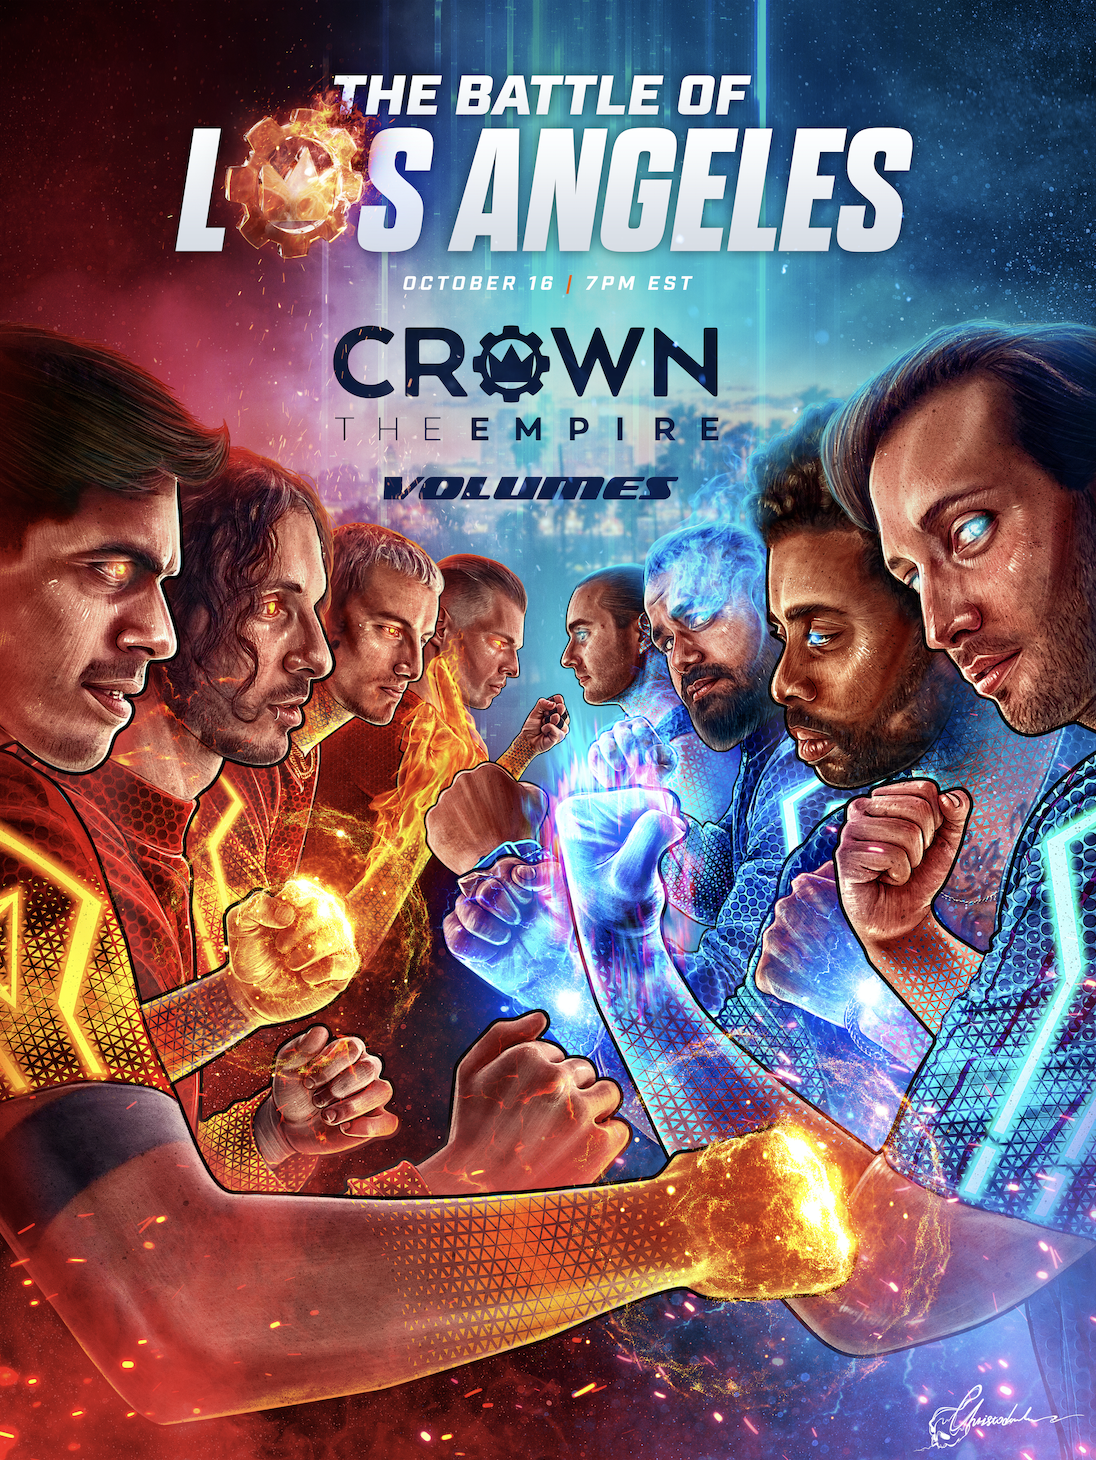 Crown the Empire + Volumes Square Off For "The Battle of Los Angeles"